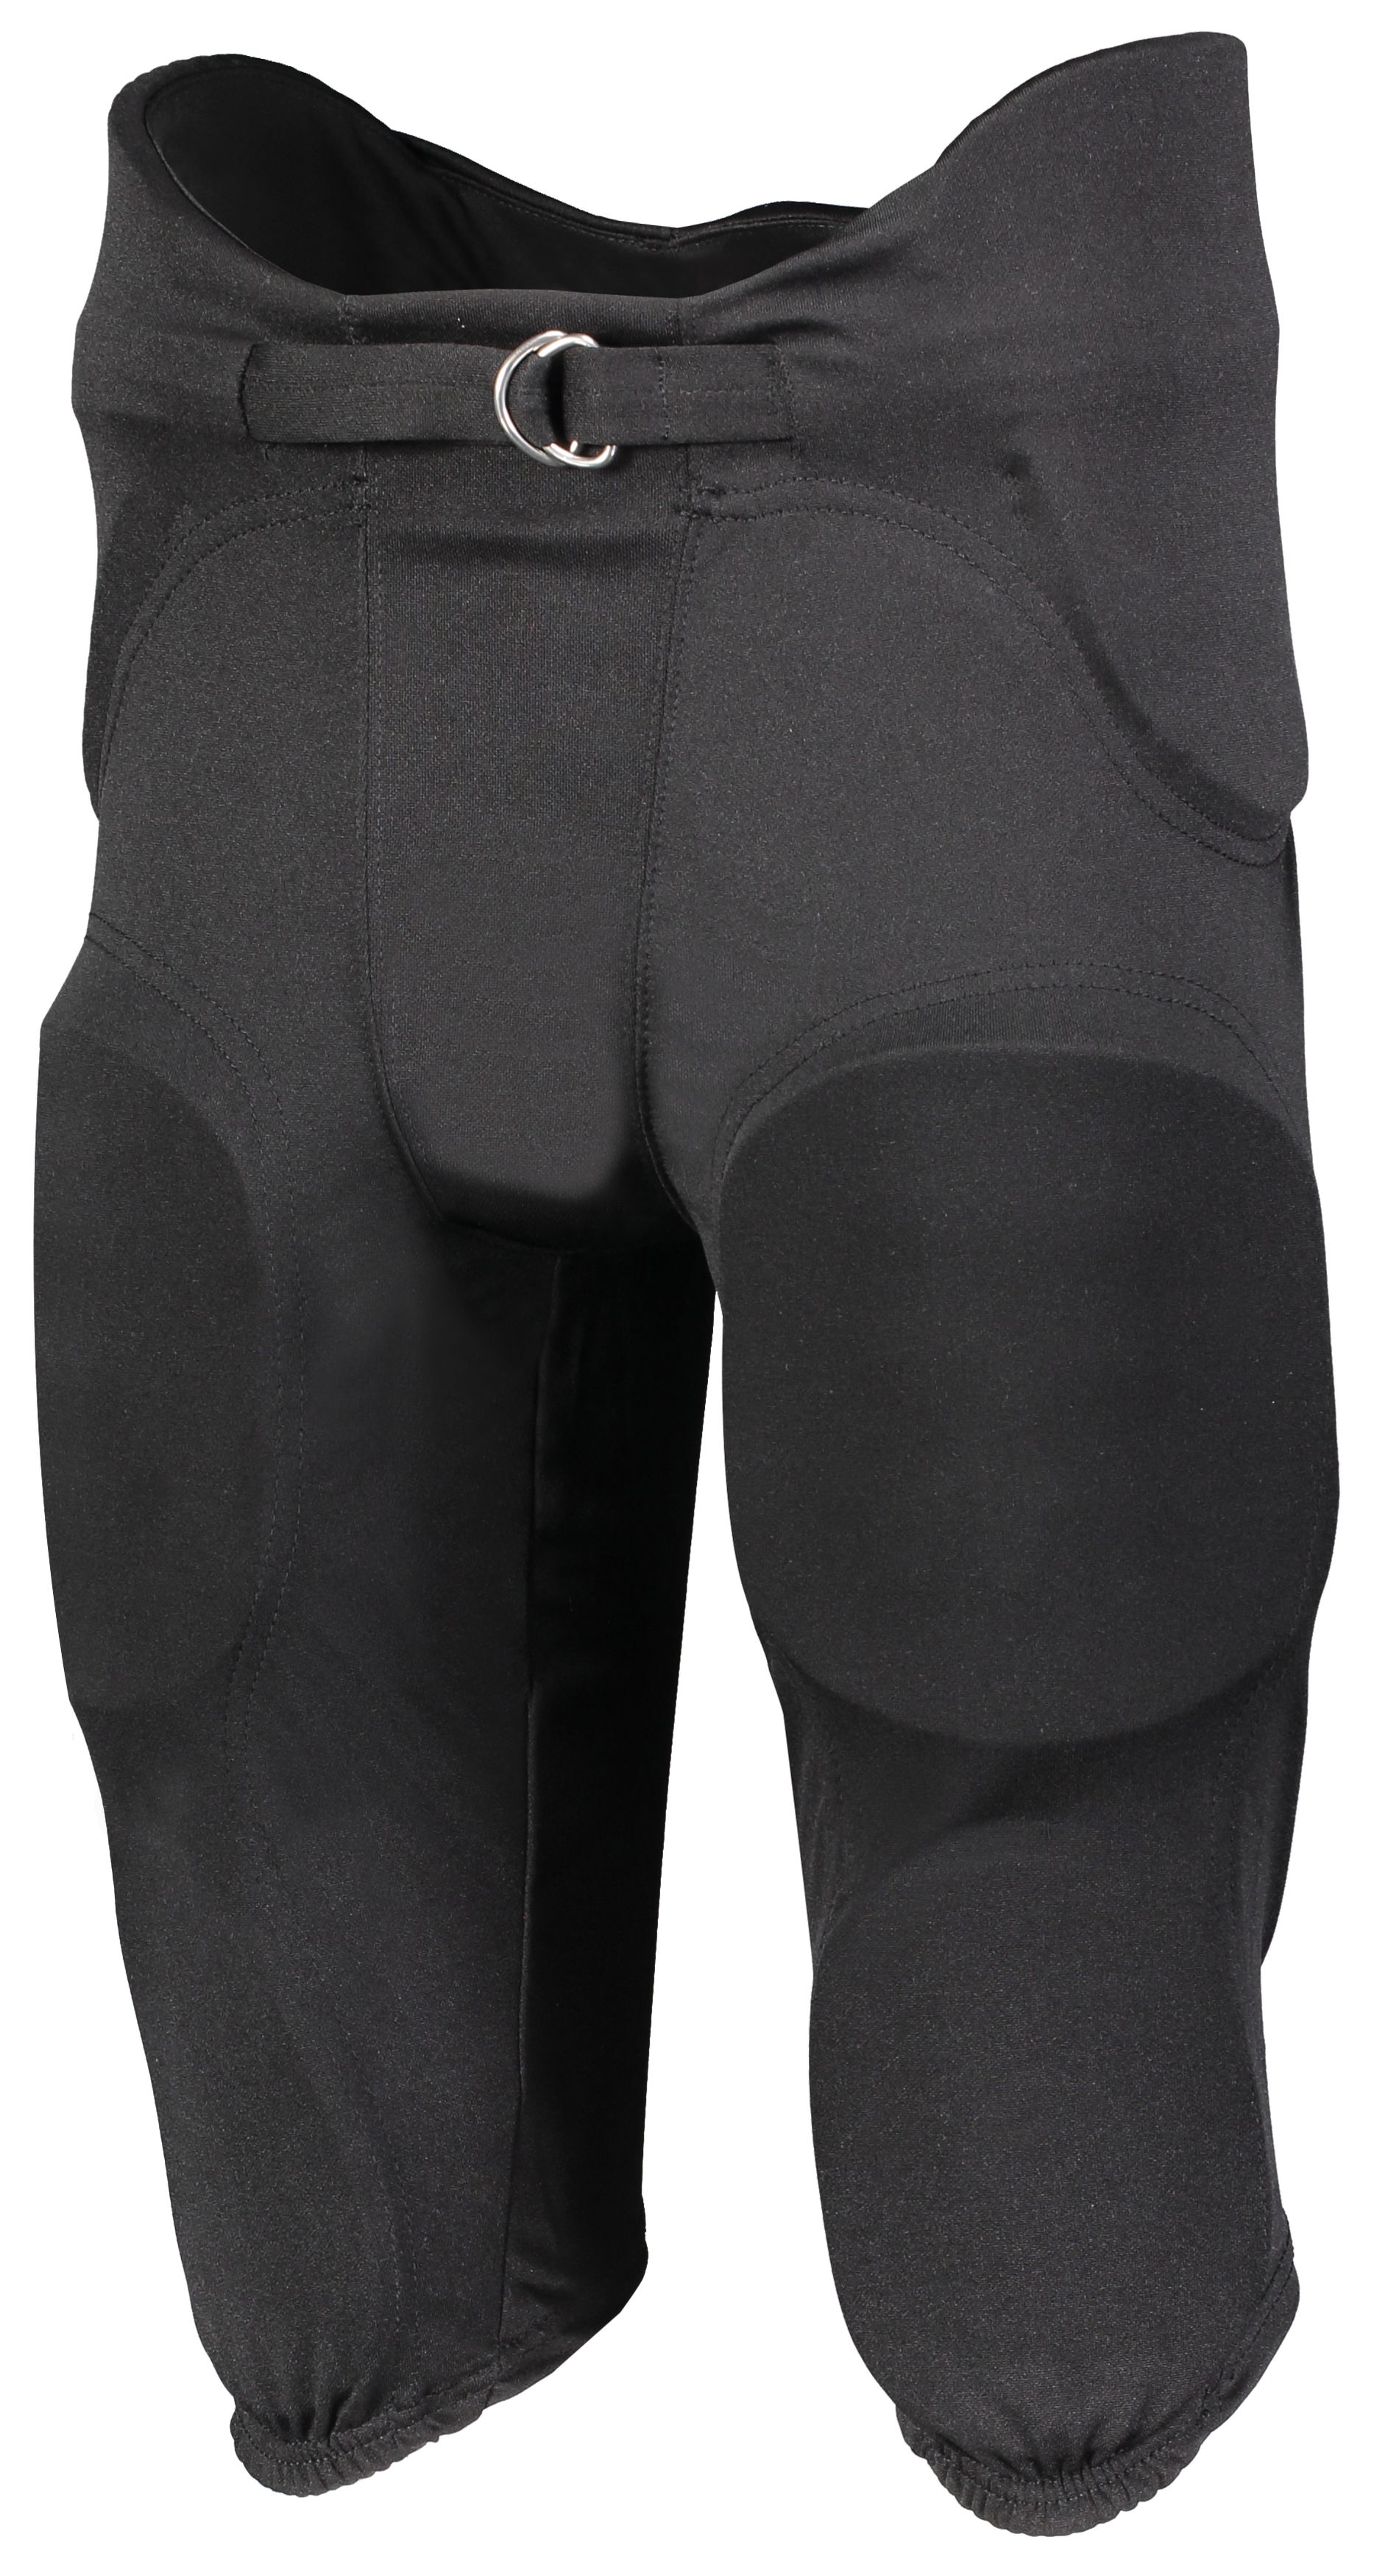 Epic Men's 7-Pad Integrated (Pads Sewn In) & Football Pants